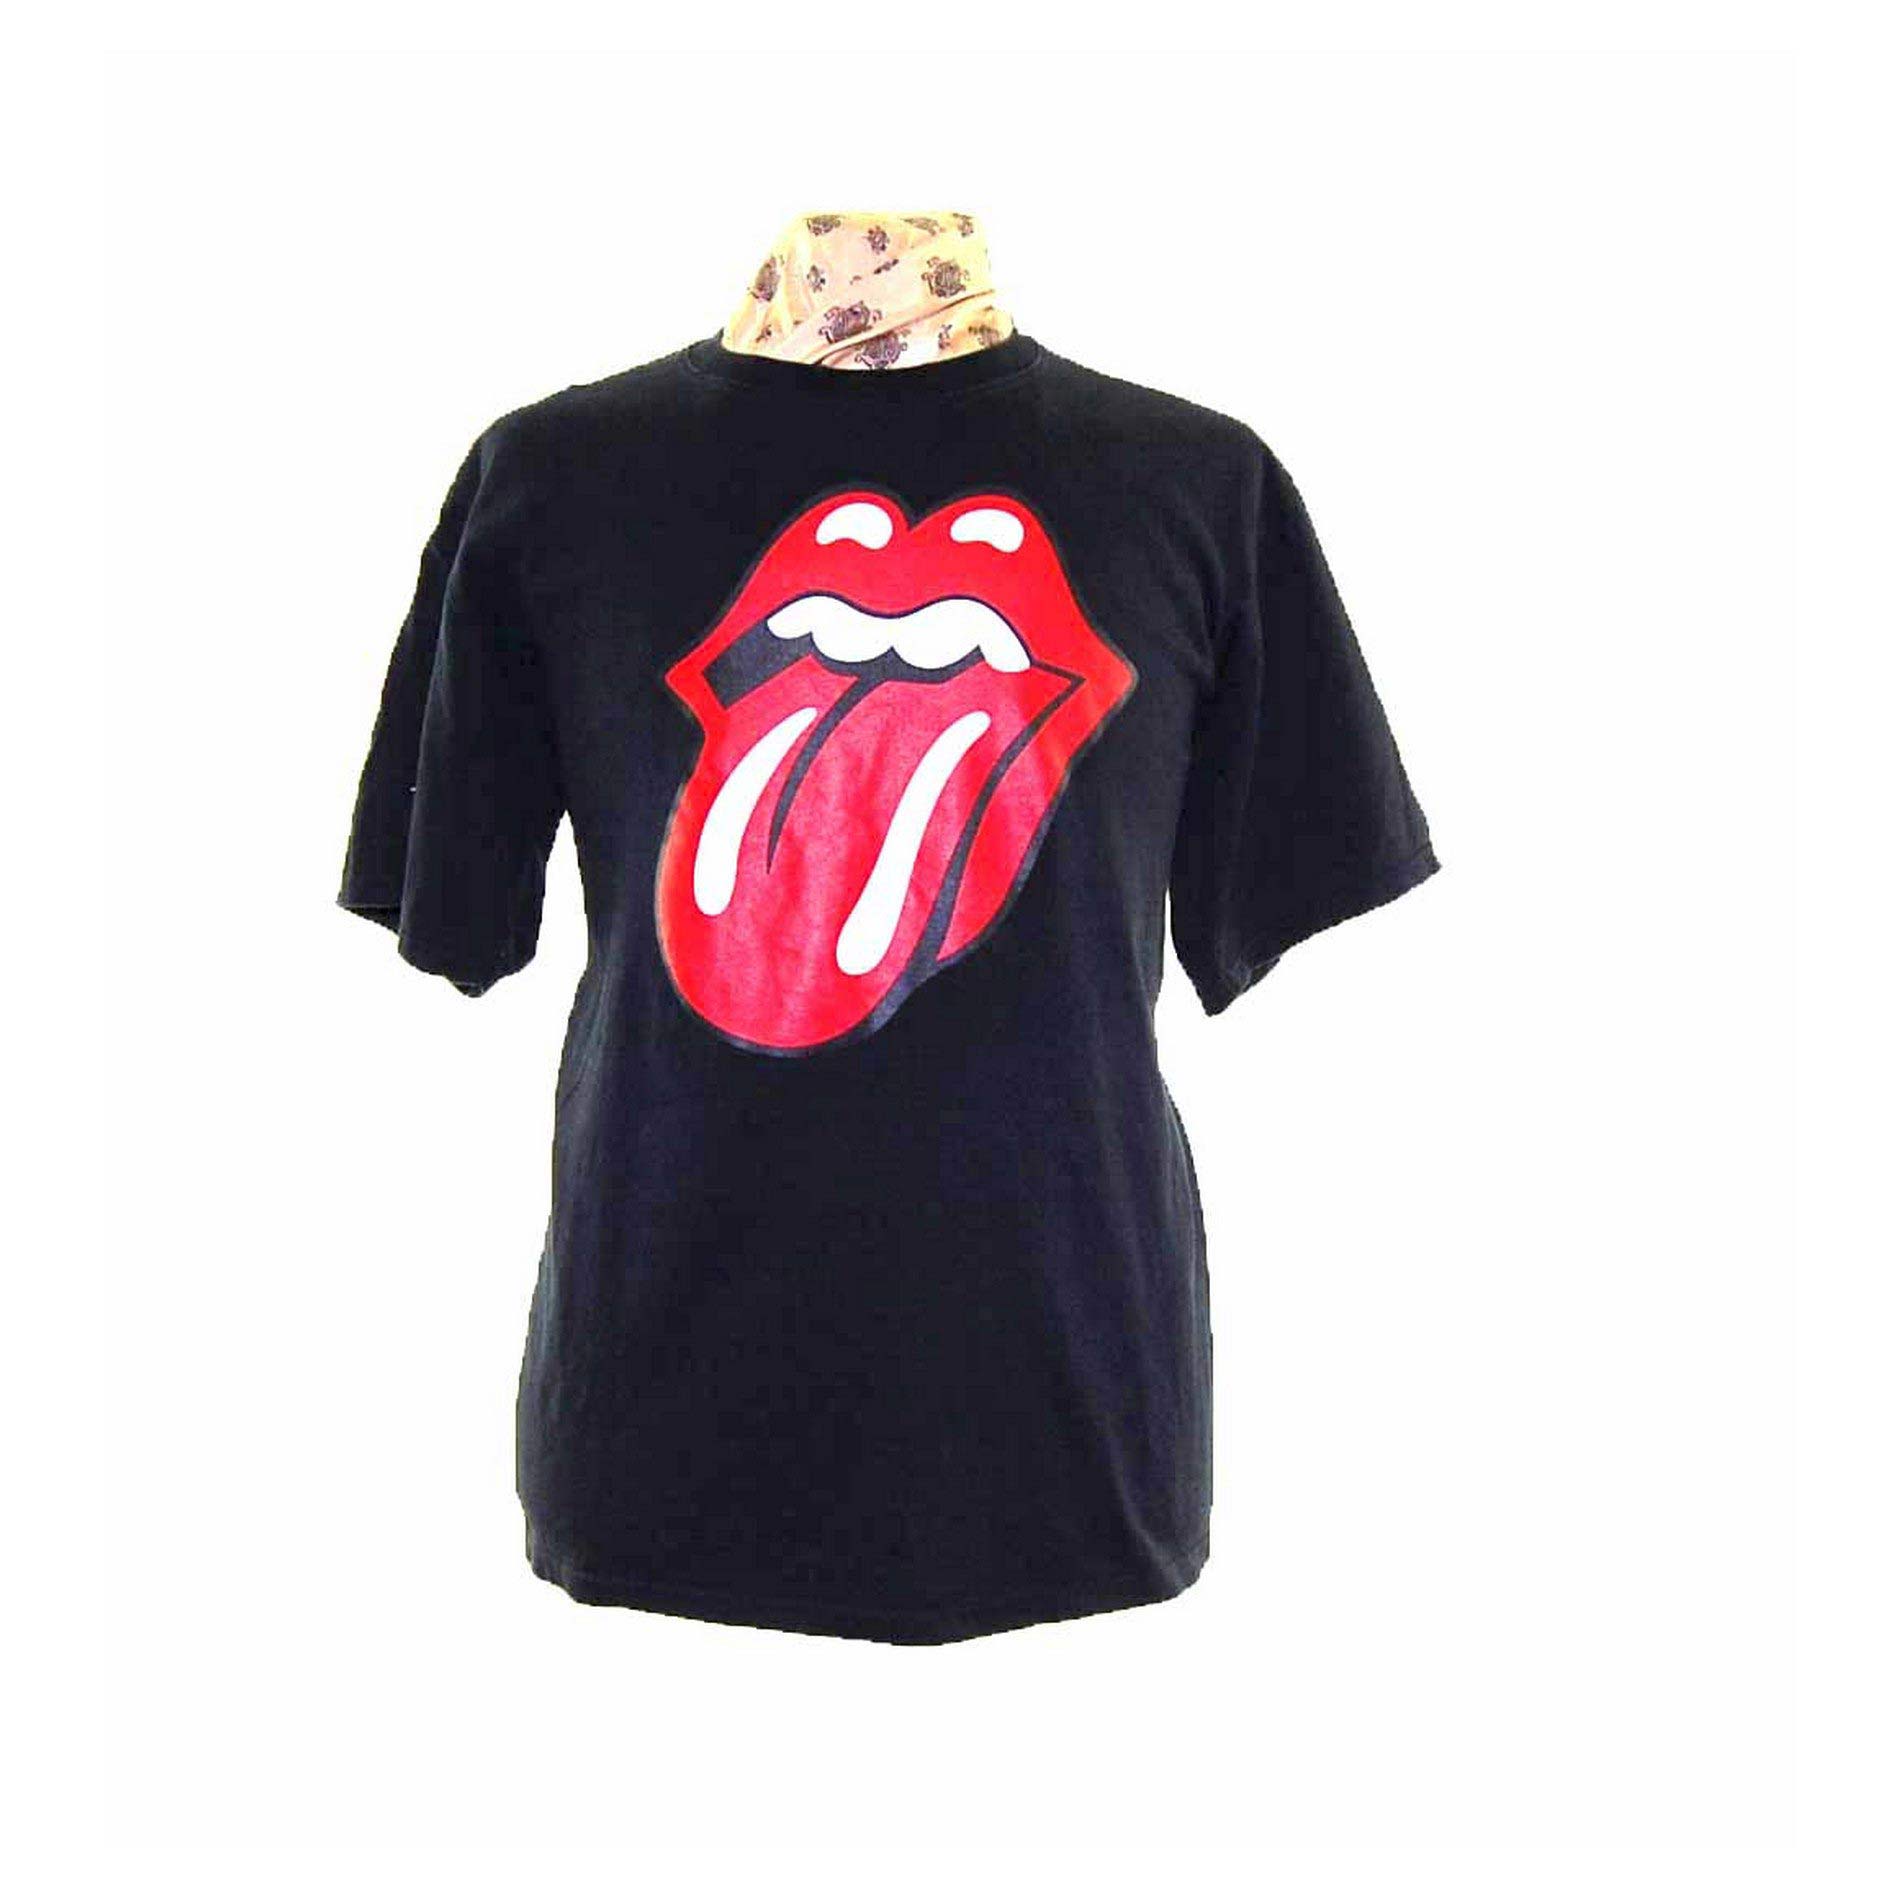 red white and blue rolling stones shirt